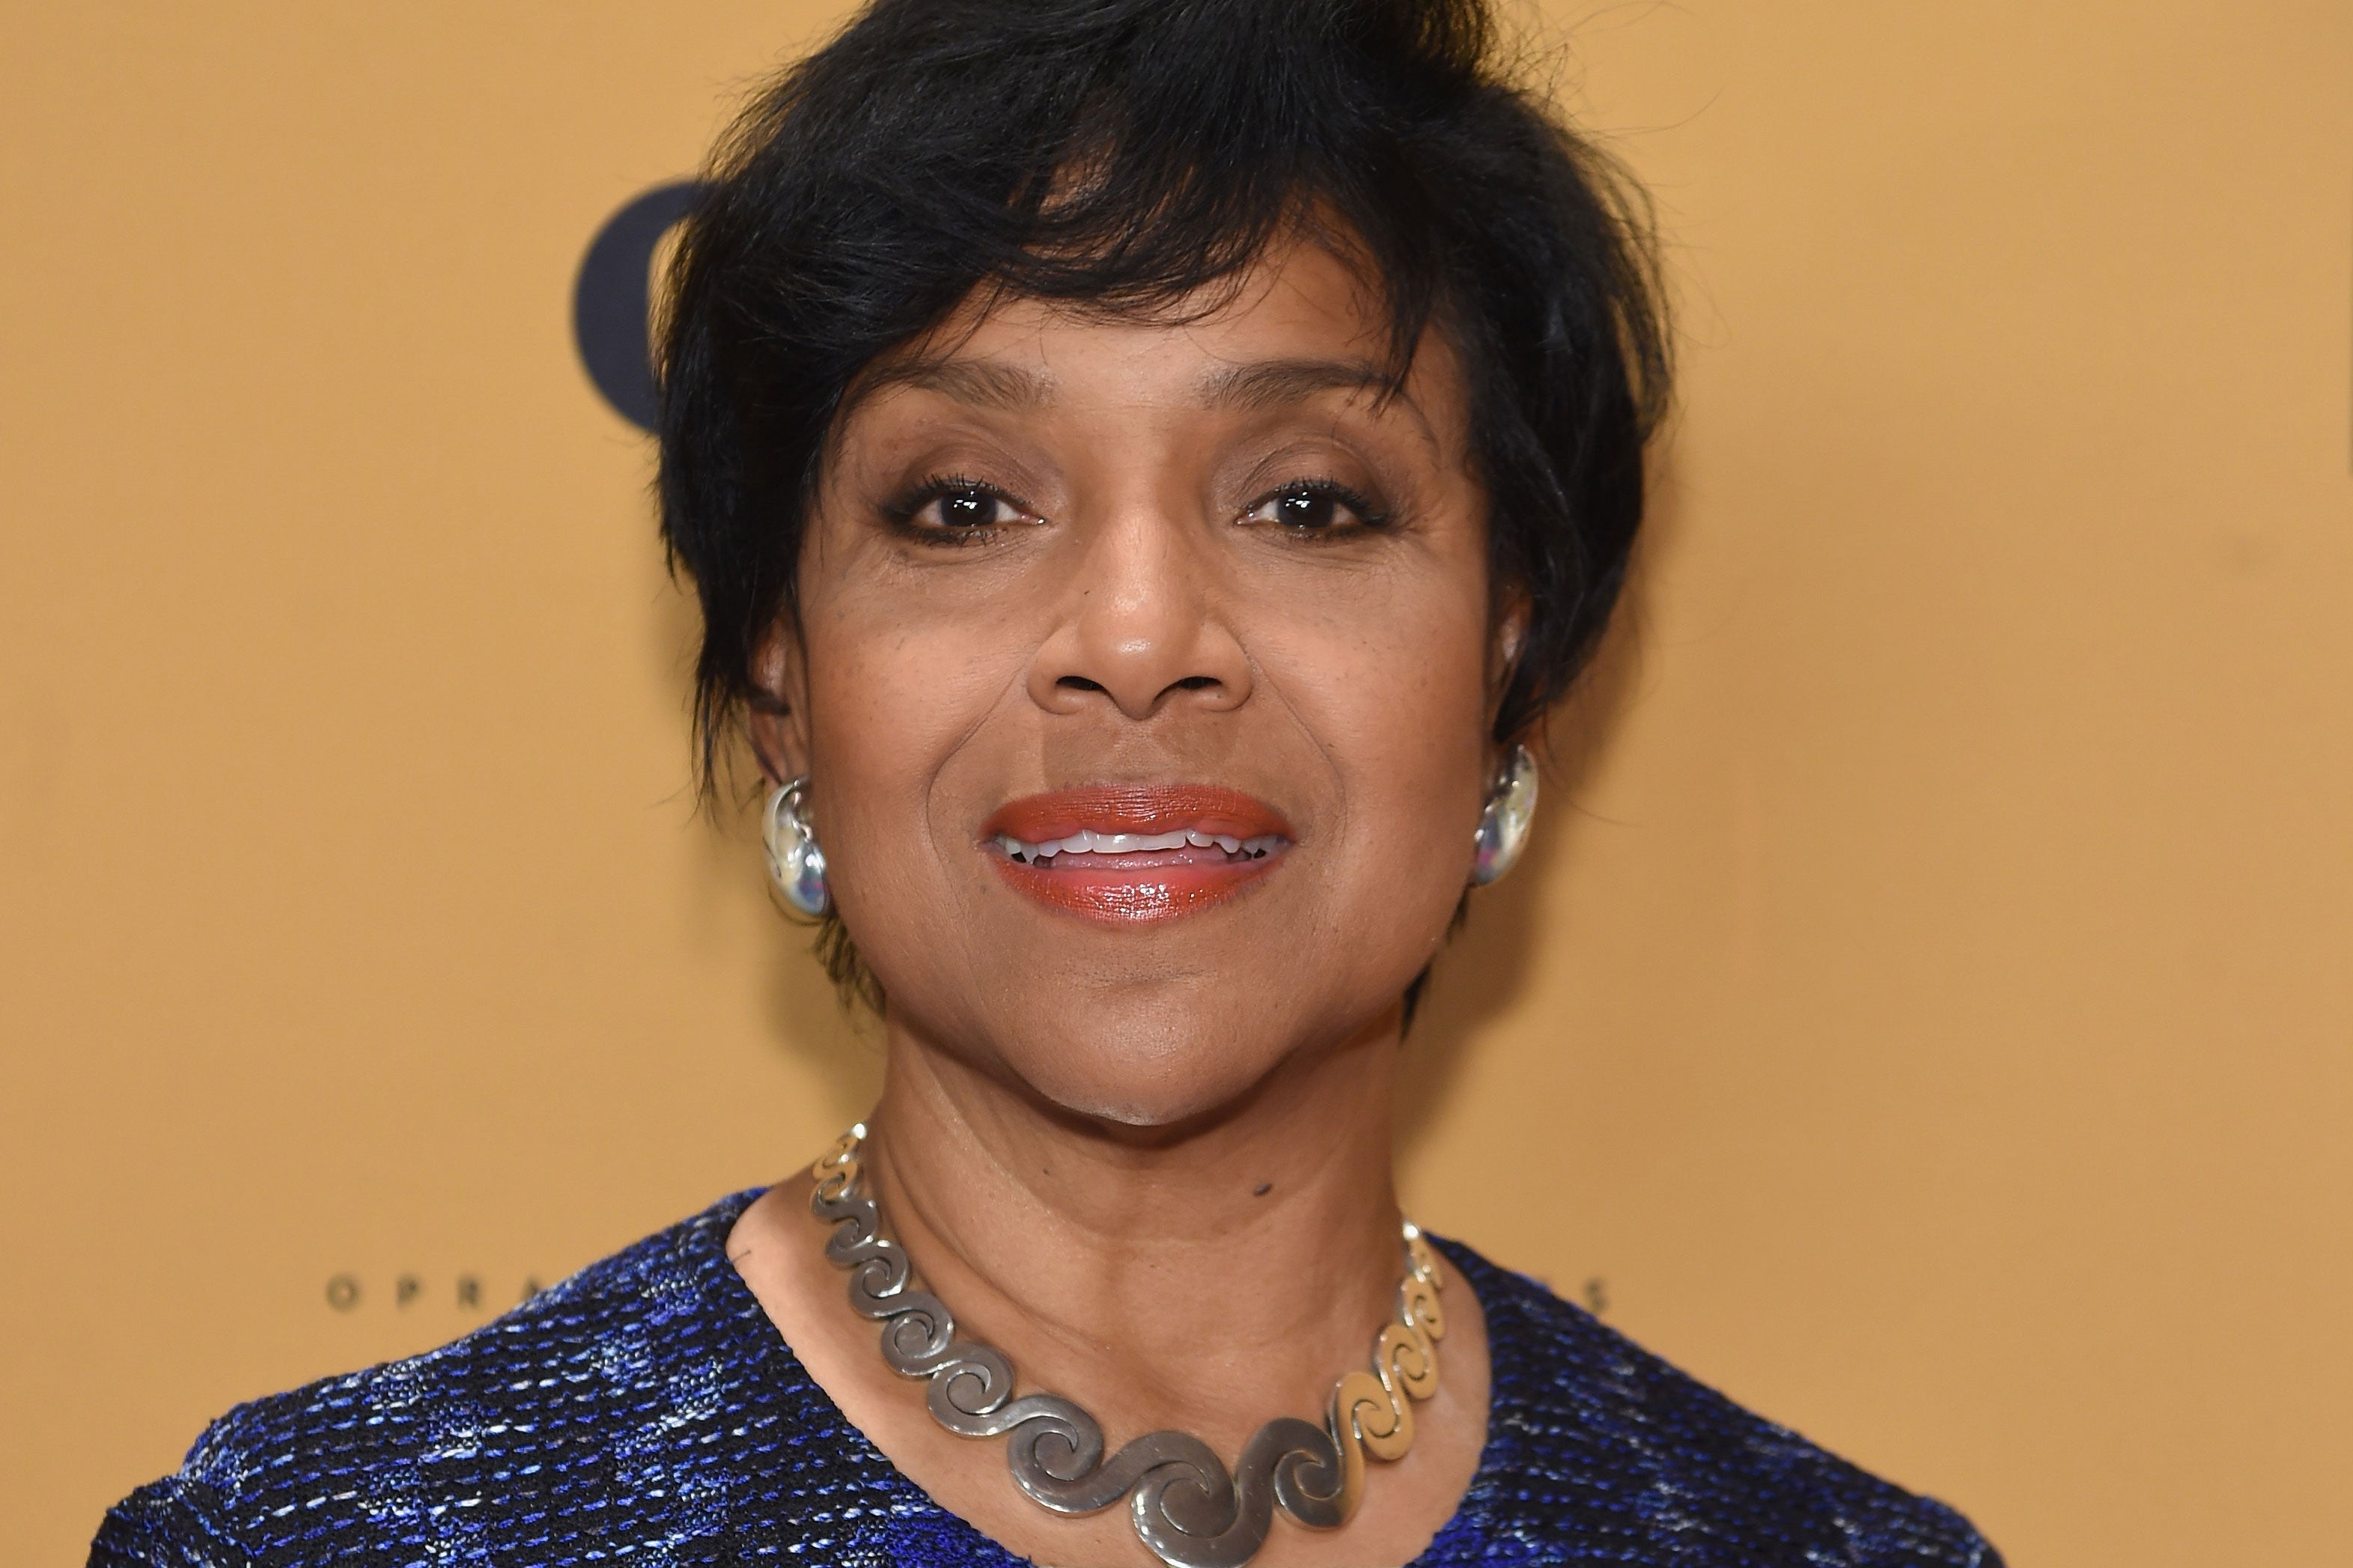 Phylicia Rashad Defends Octavia Spencer's Role In 'The Shack'
